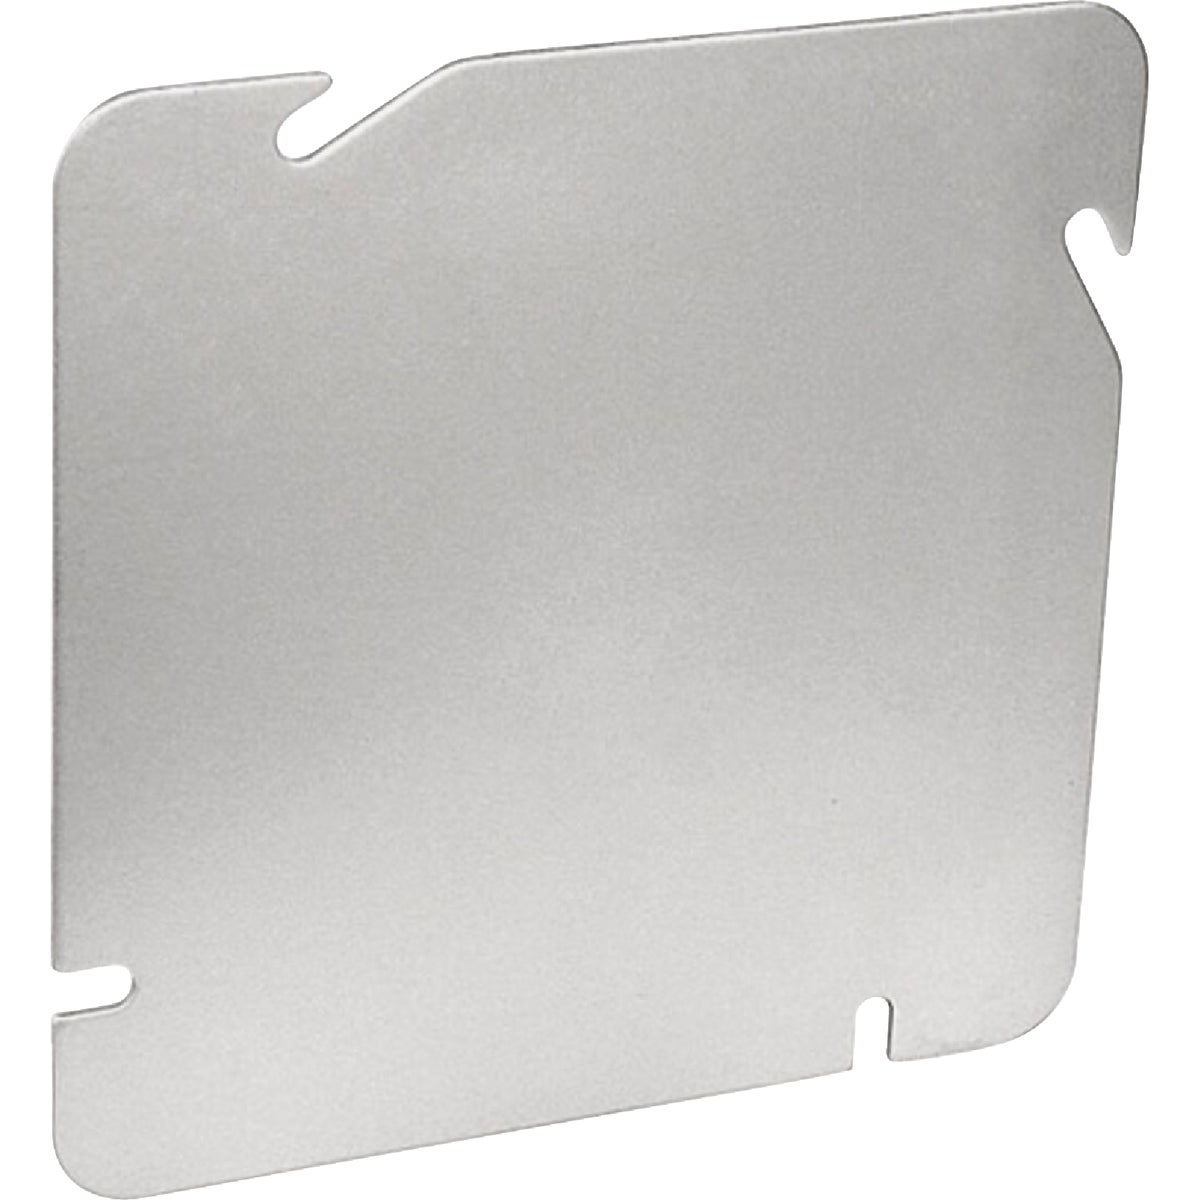 Item 508098, Square blank cover. Used with 4-11/16 In.